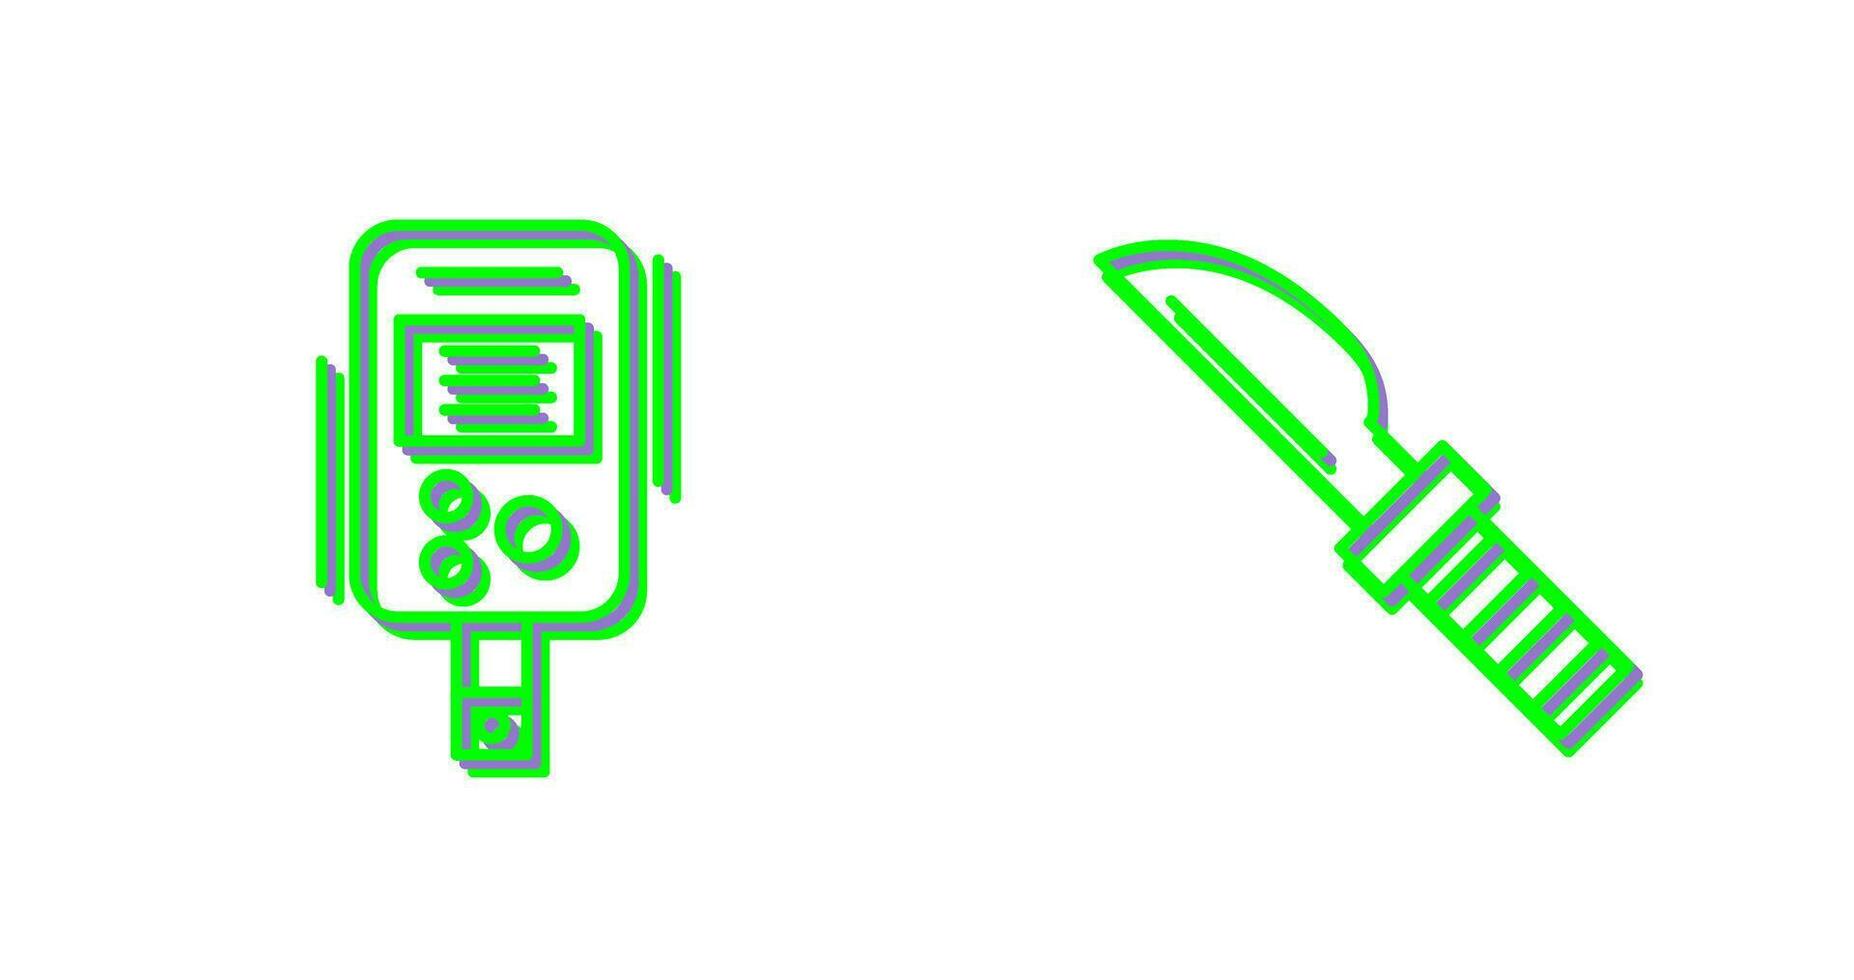 Diabetes Test and Knife Icon vector